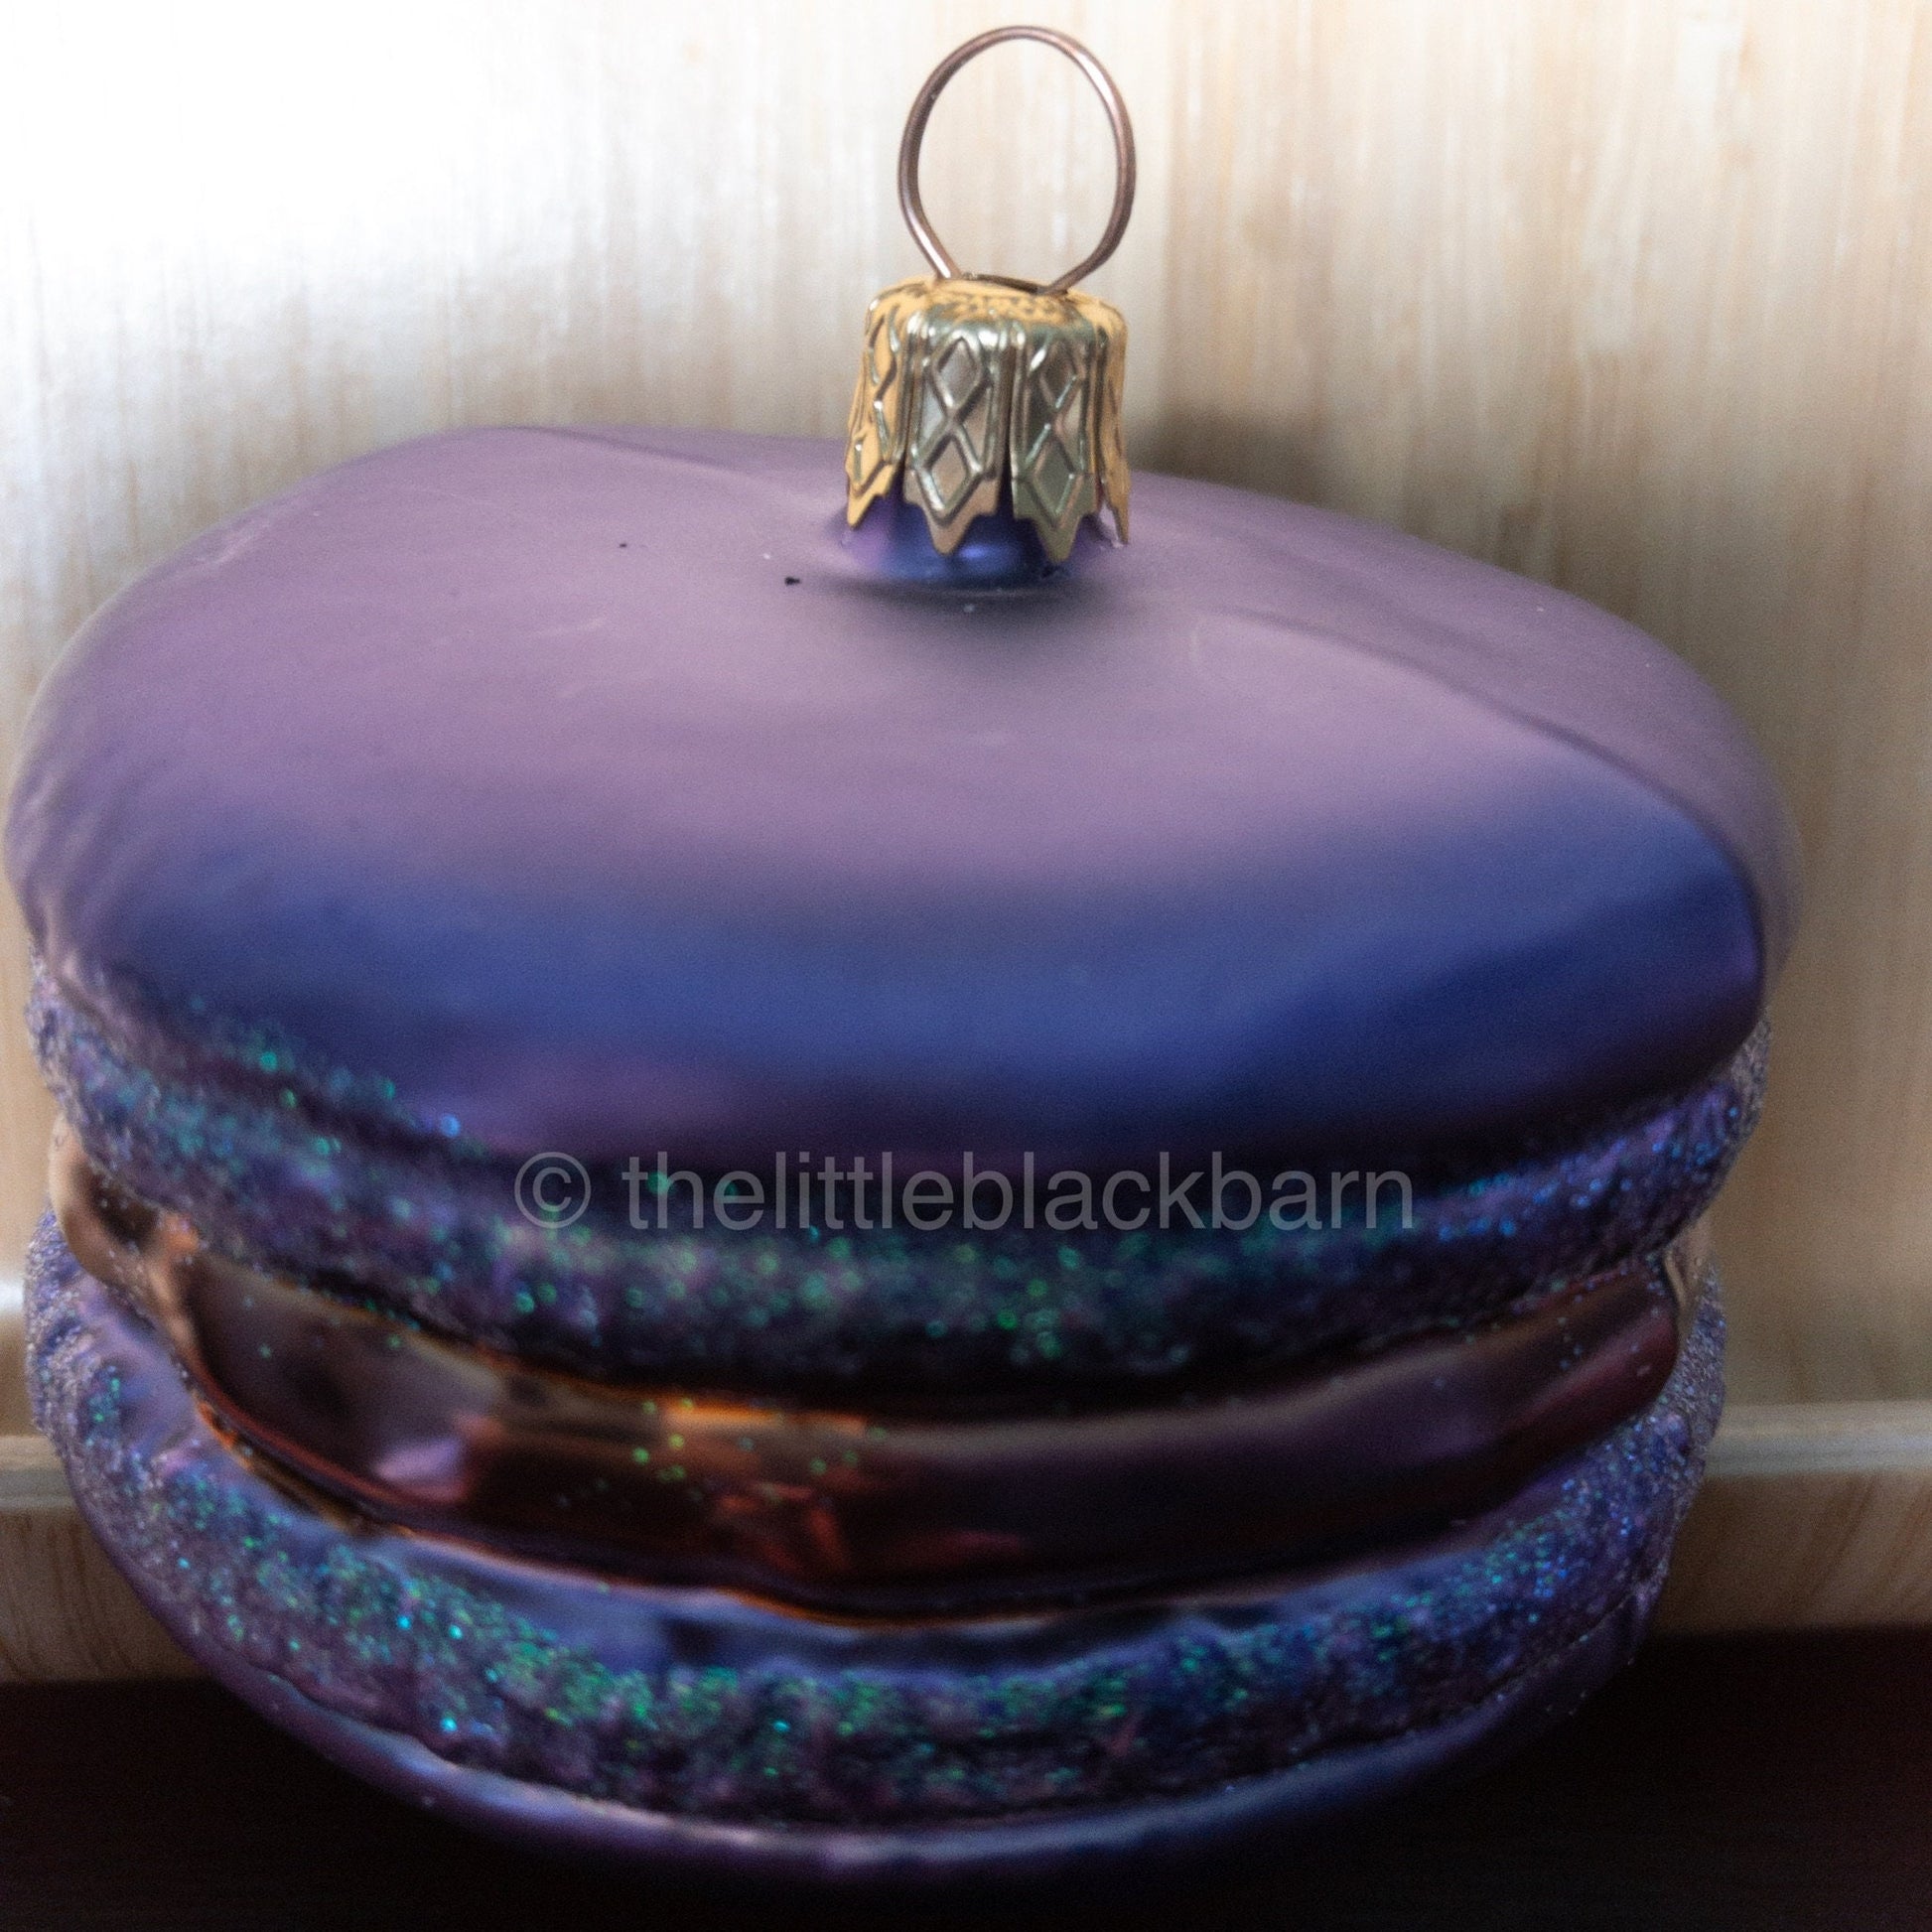 Handcrafted Ornament From Poland, Looks Like a Purple Hamburger Or Cookie